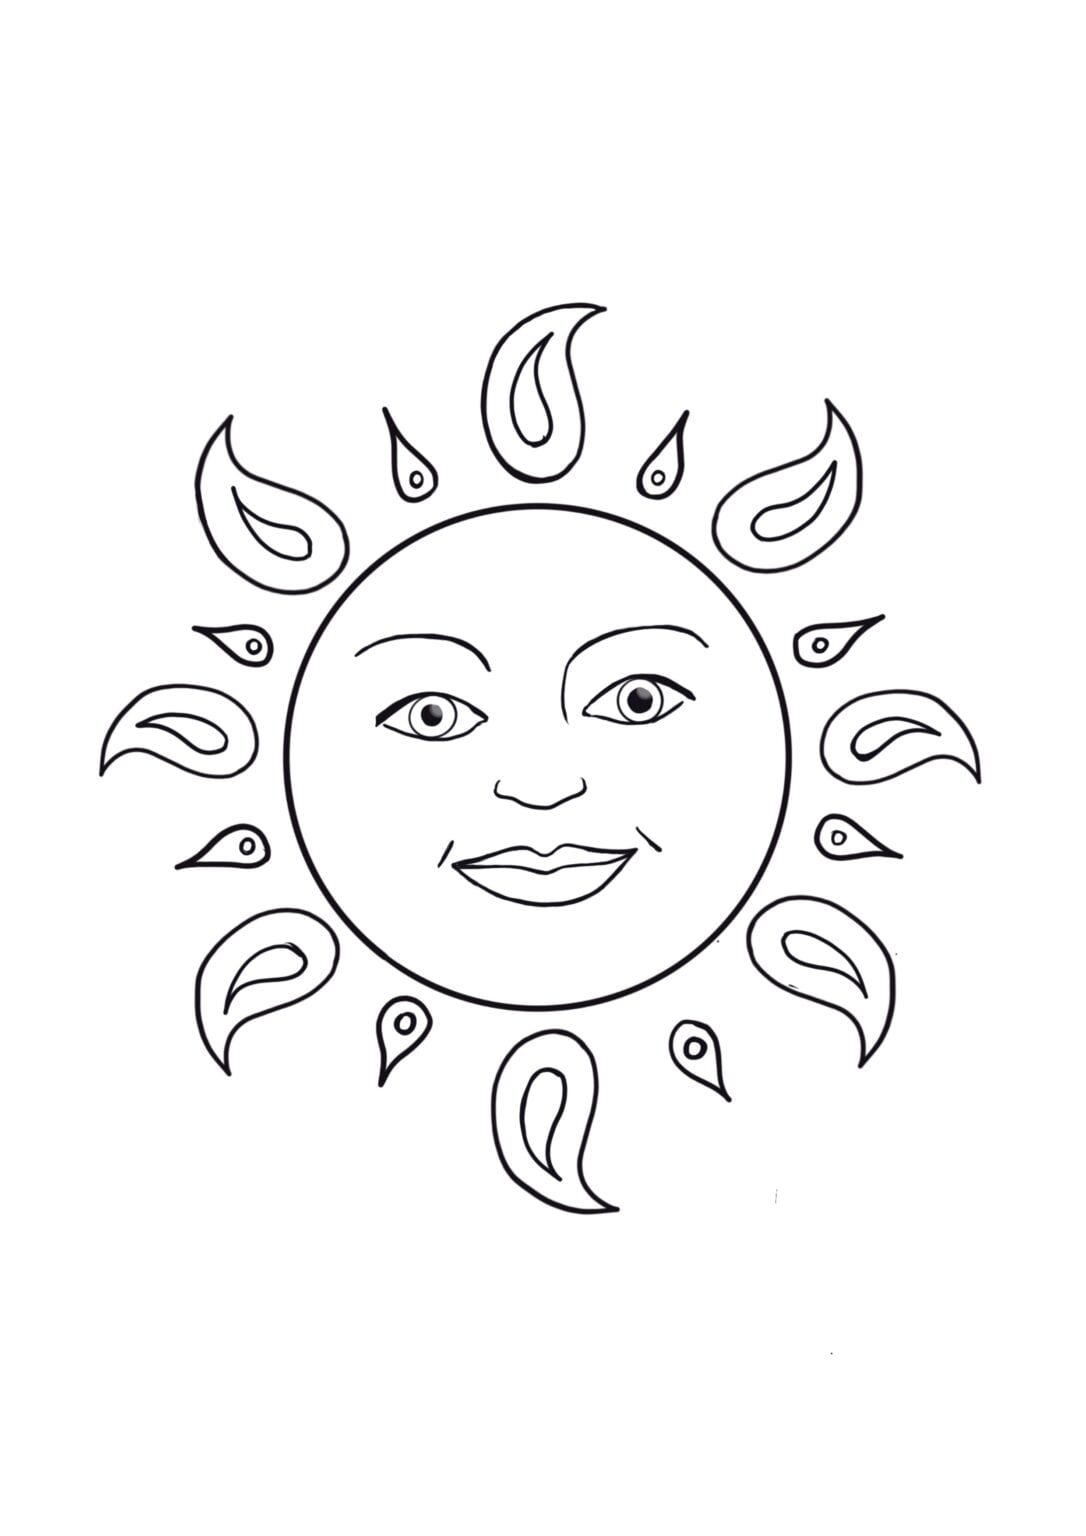 Looking for a Sun Template? 8 FREE Printable Suns to Warm Your Creative ...